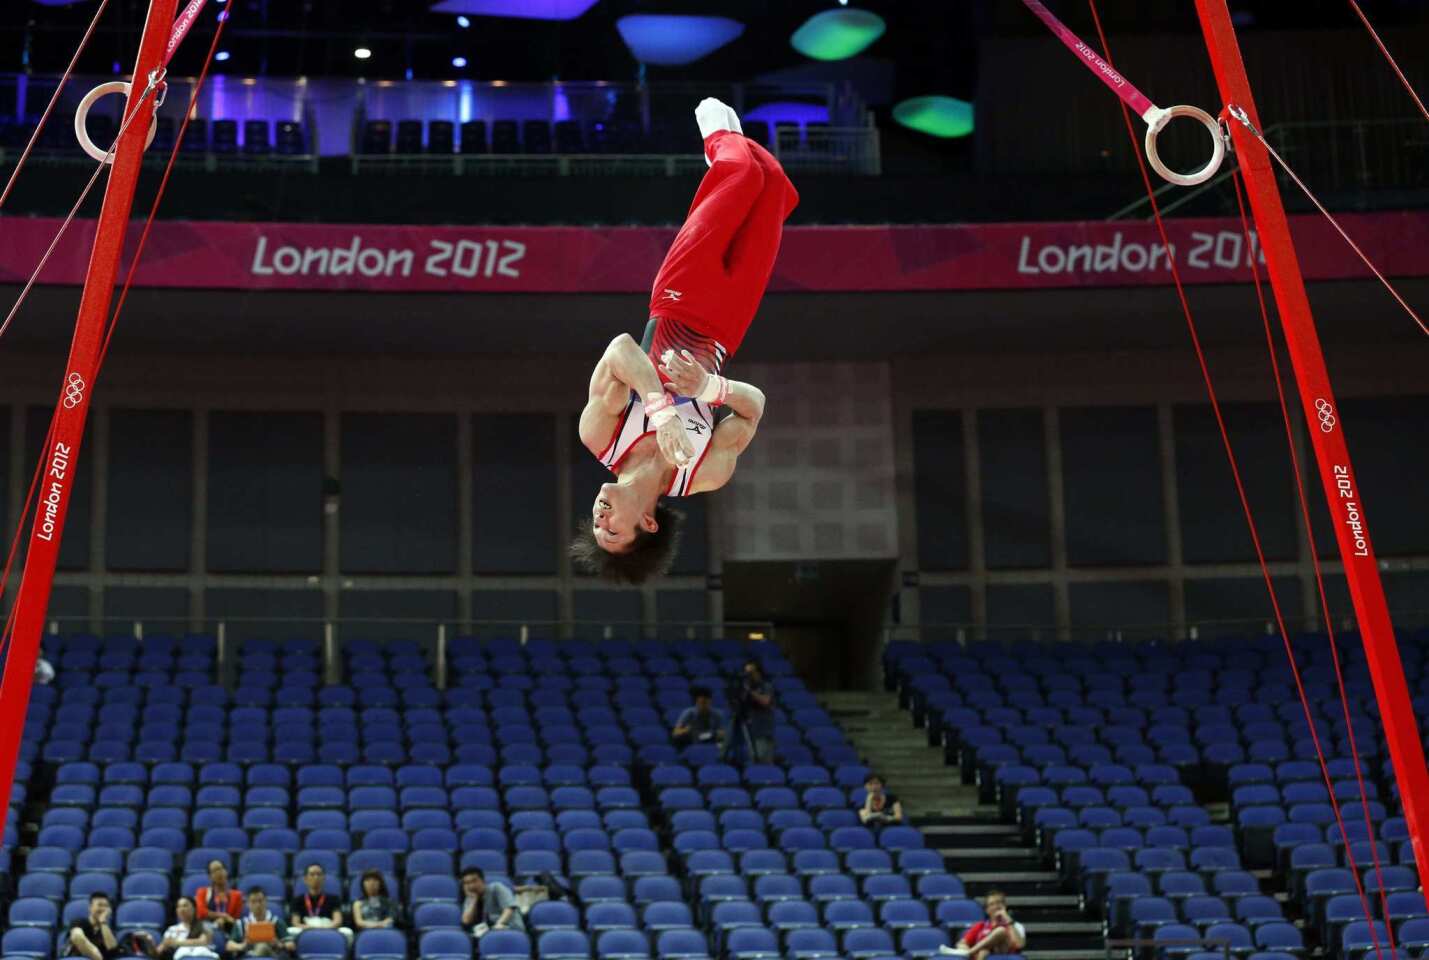 Japanese gymnastics world champion Kohei Uchimura takes part in a training session two days before the start of the London 2012 Olympic Games.